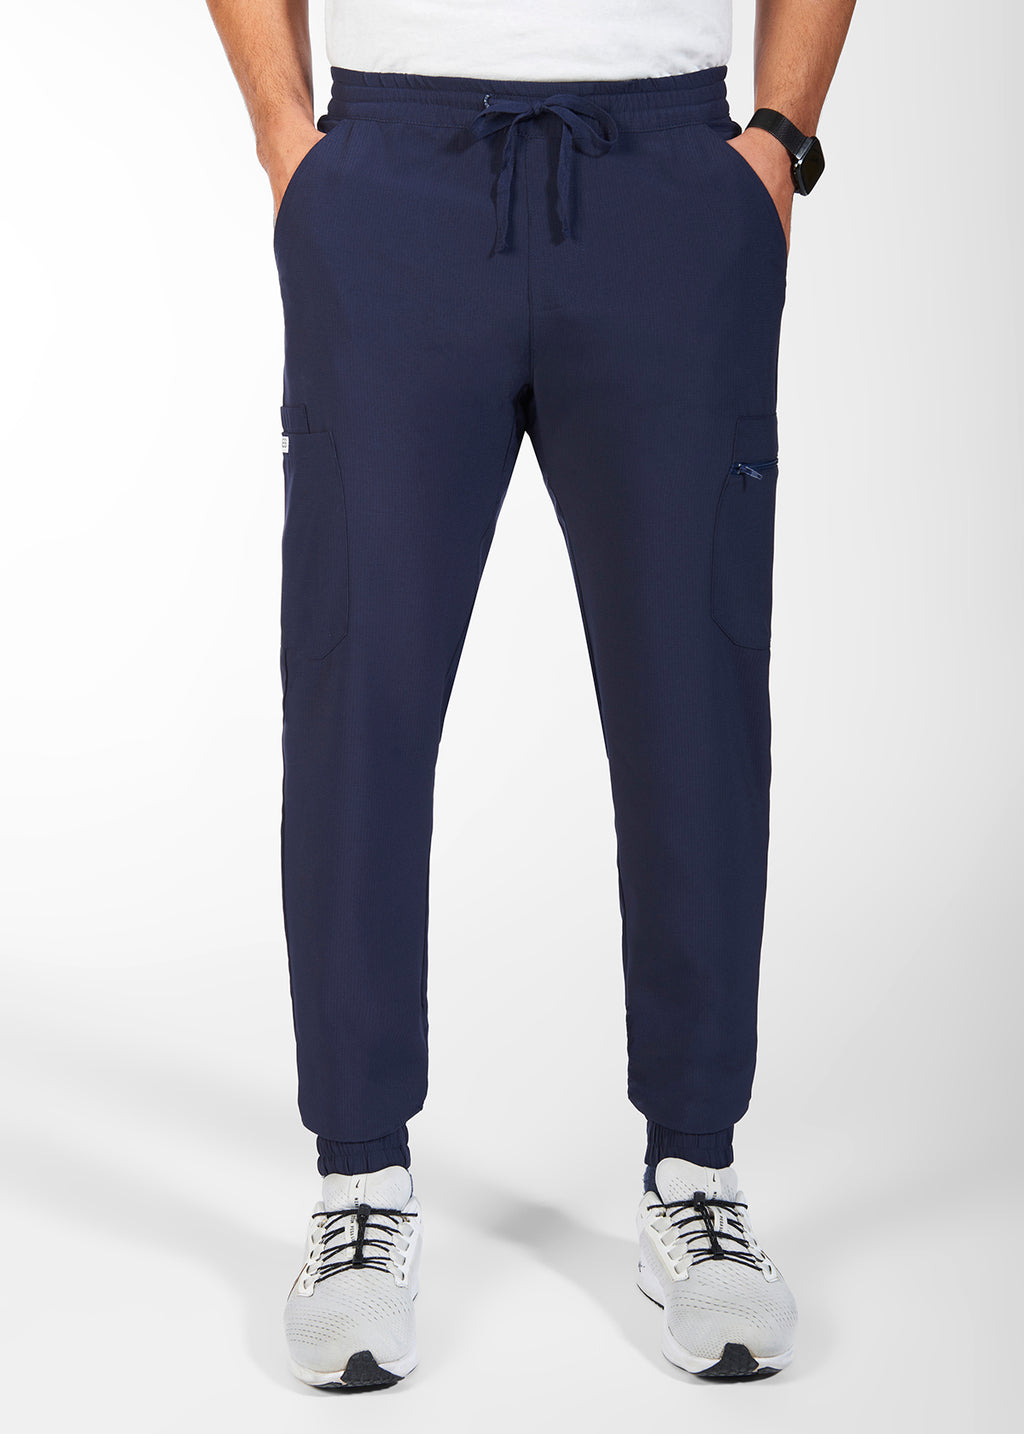 Product - The Adrian Unisex Jogger Fit